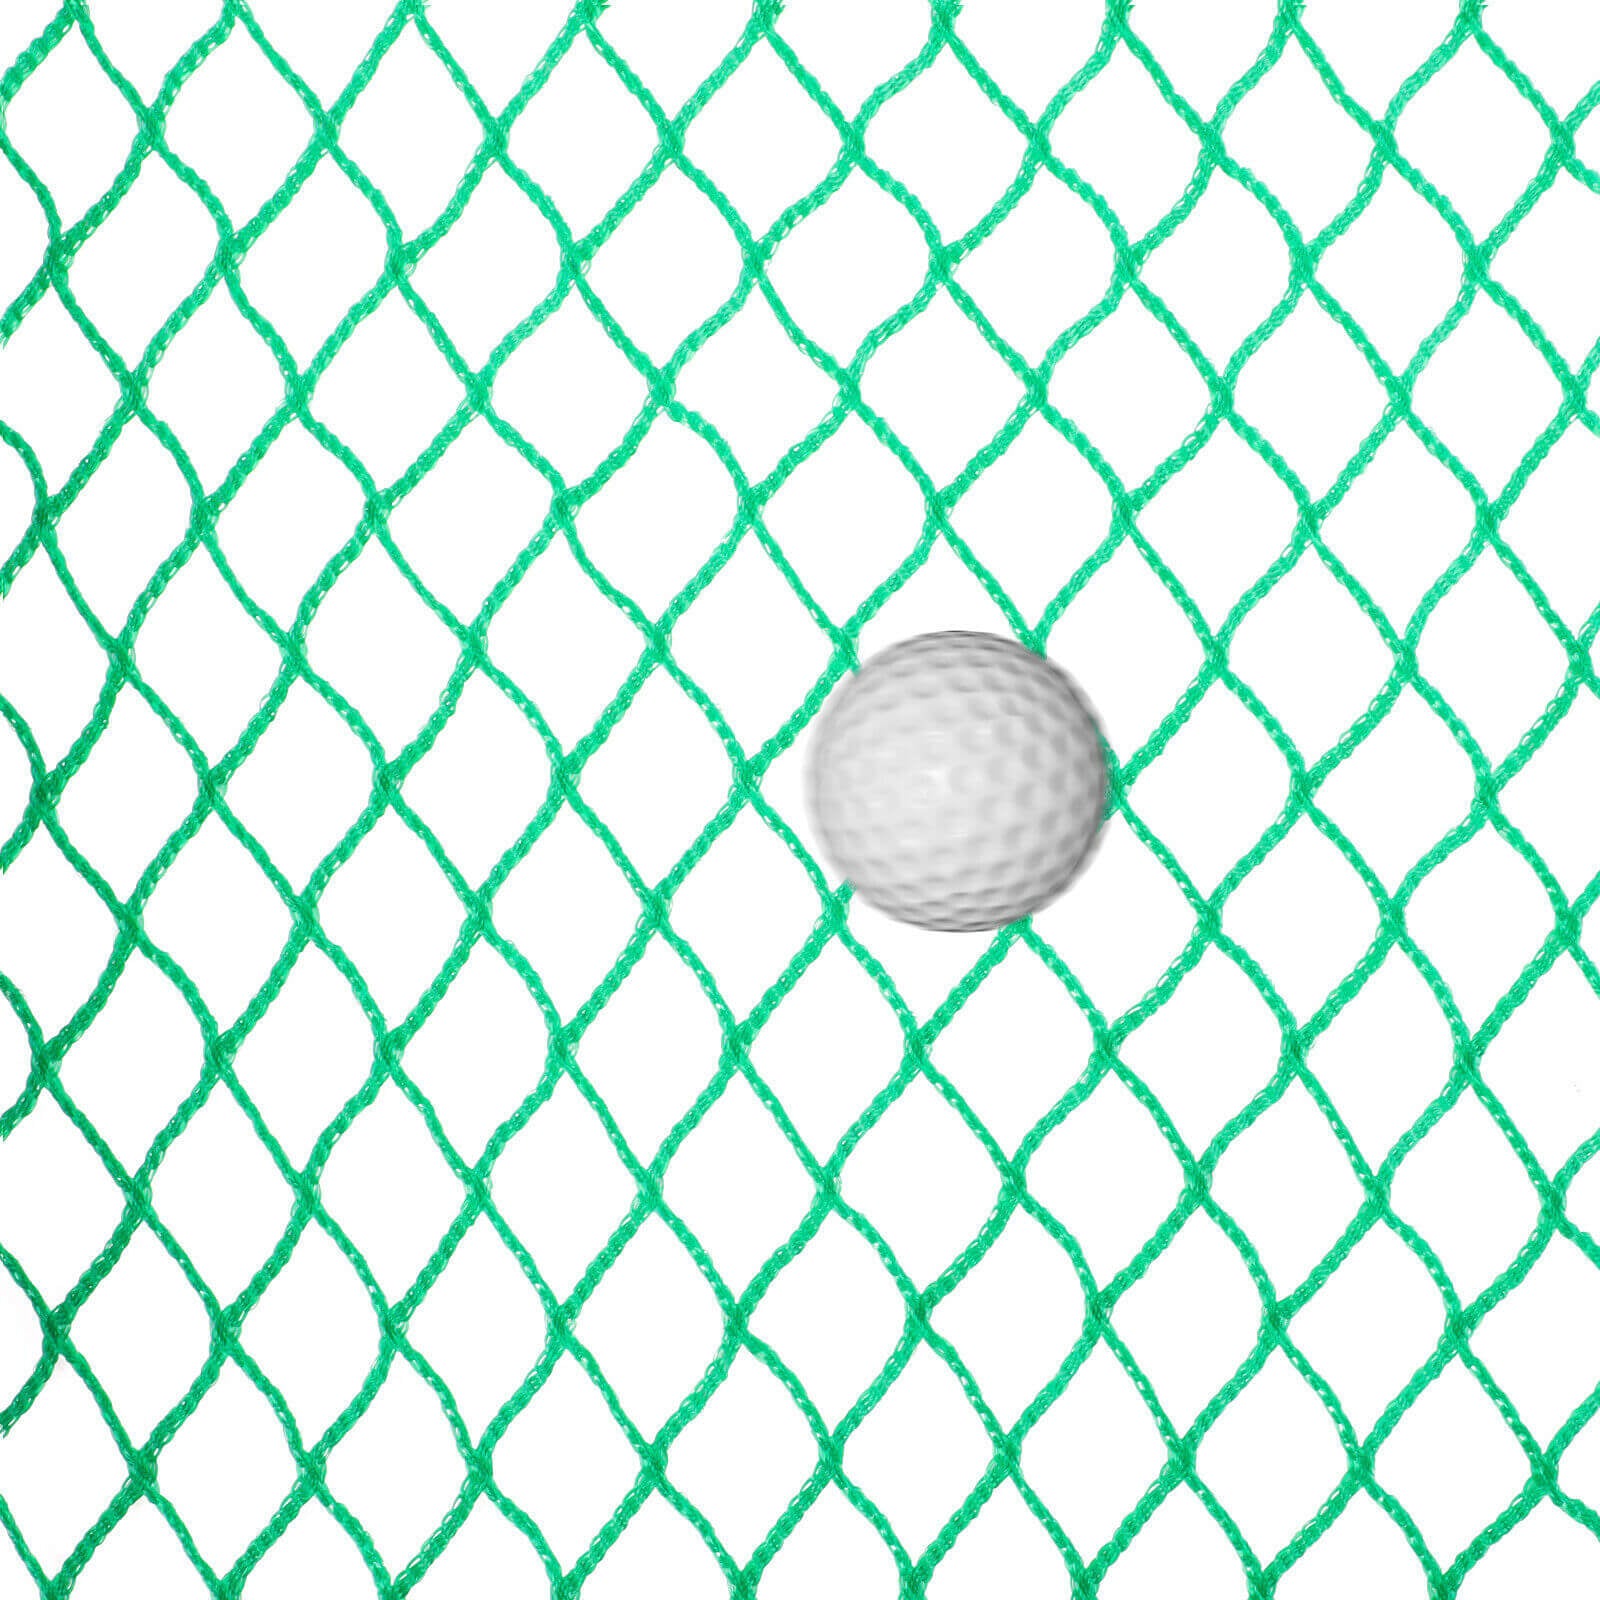 This netting will stop your golf ball